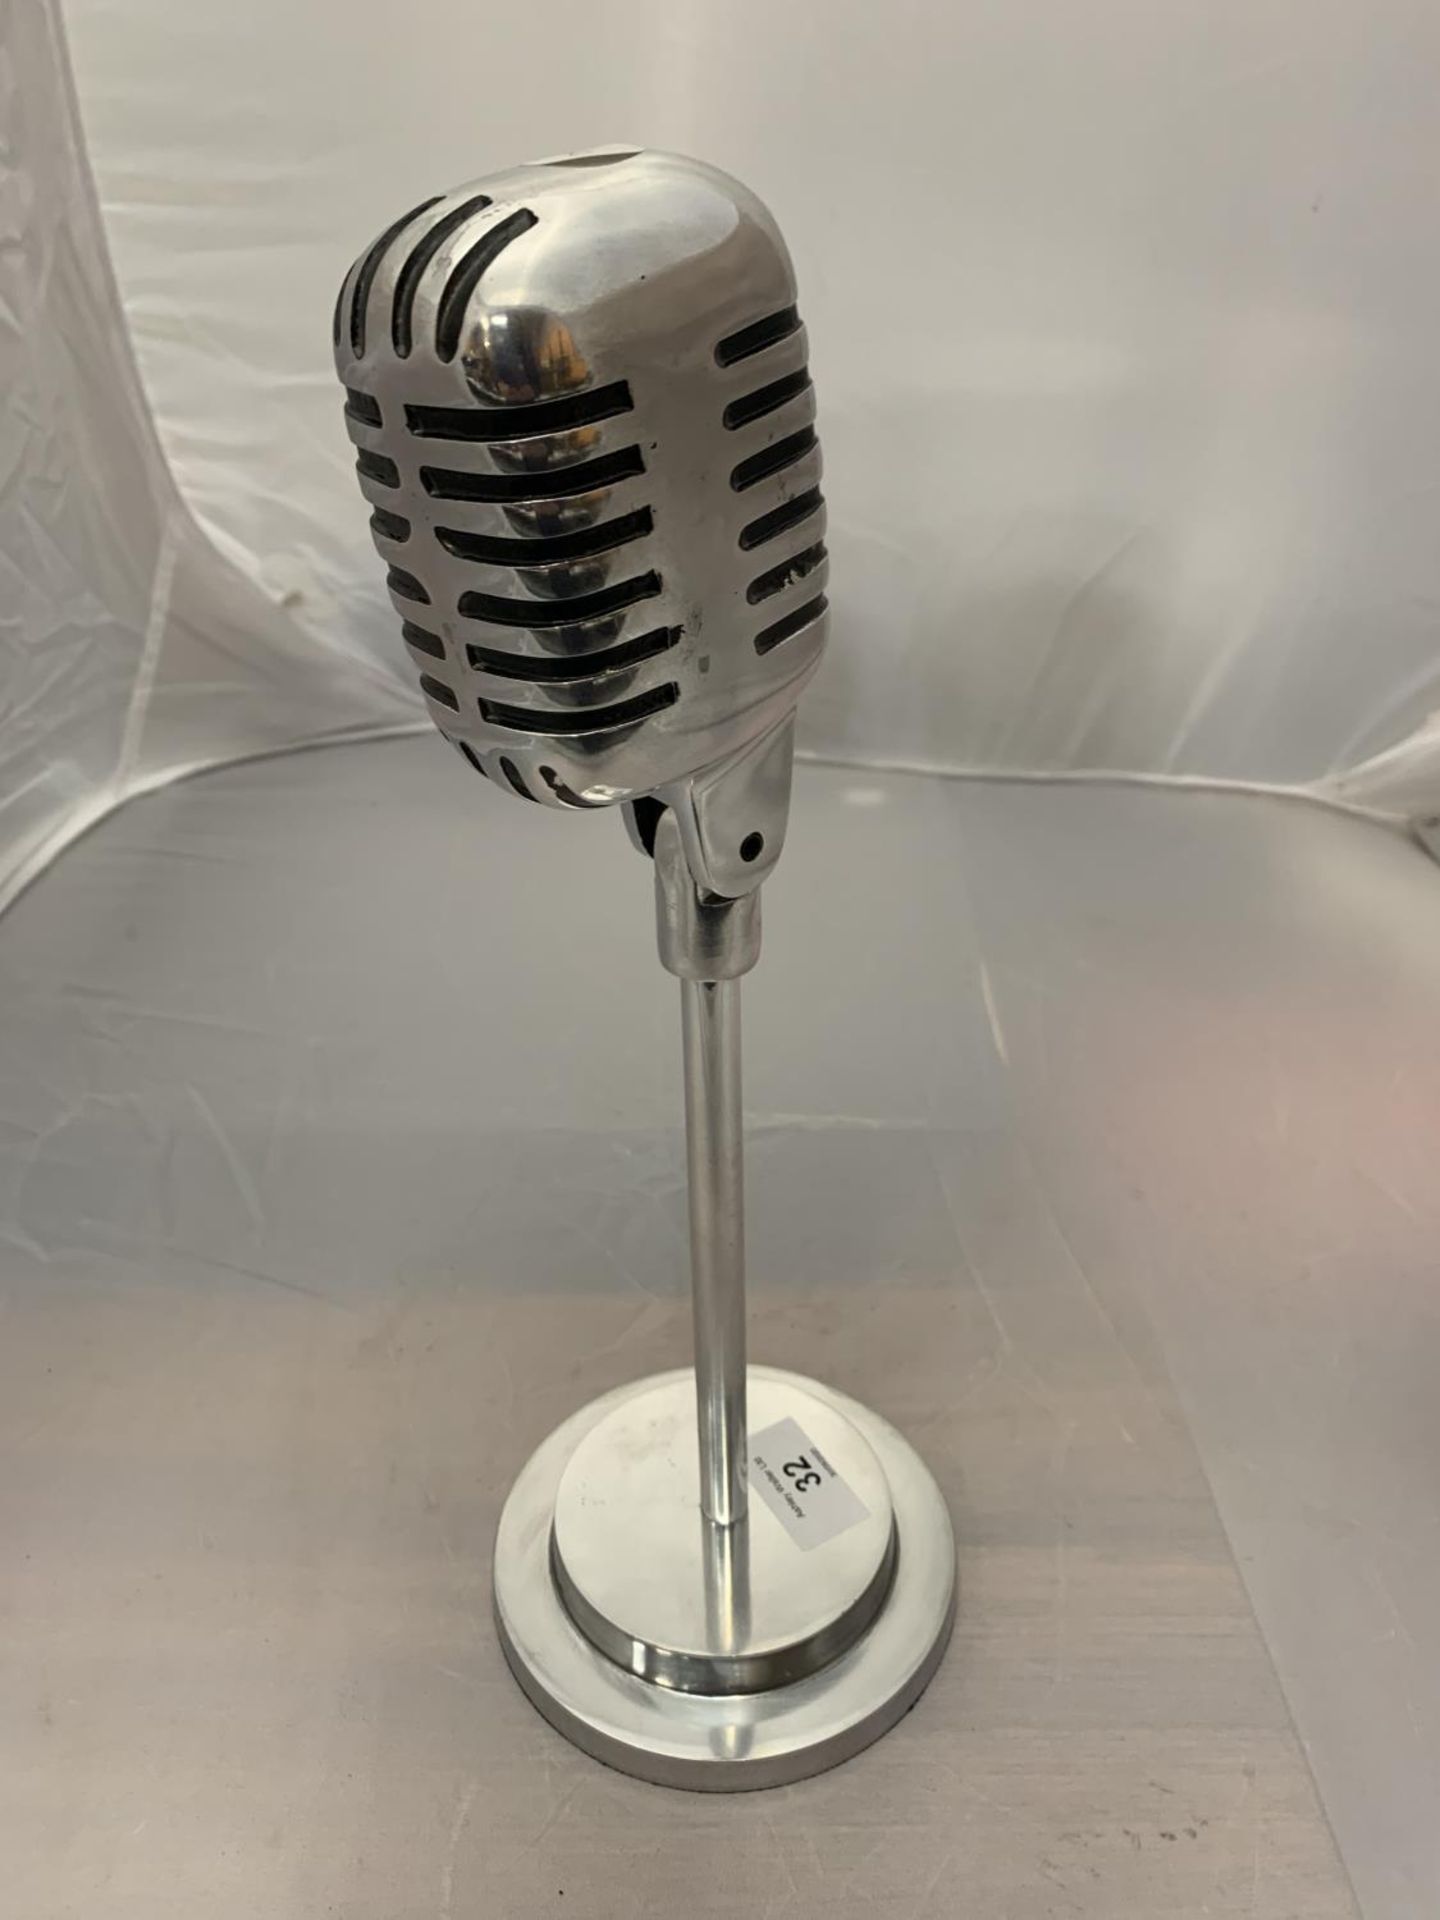 A CHROME OLD FASHIONED STYLE MICROPHONE